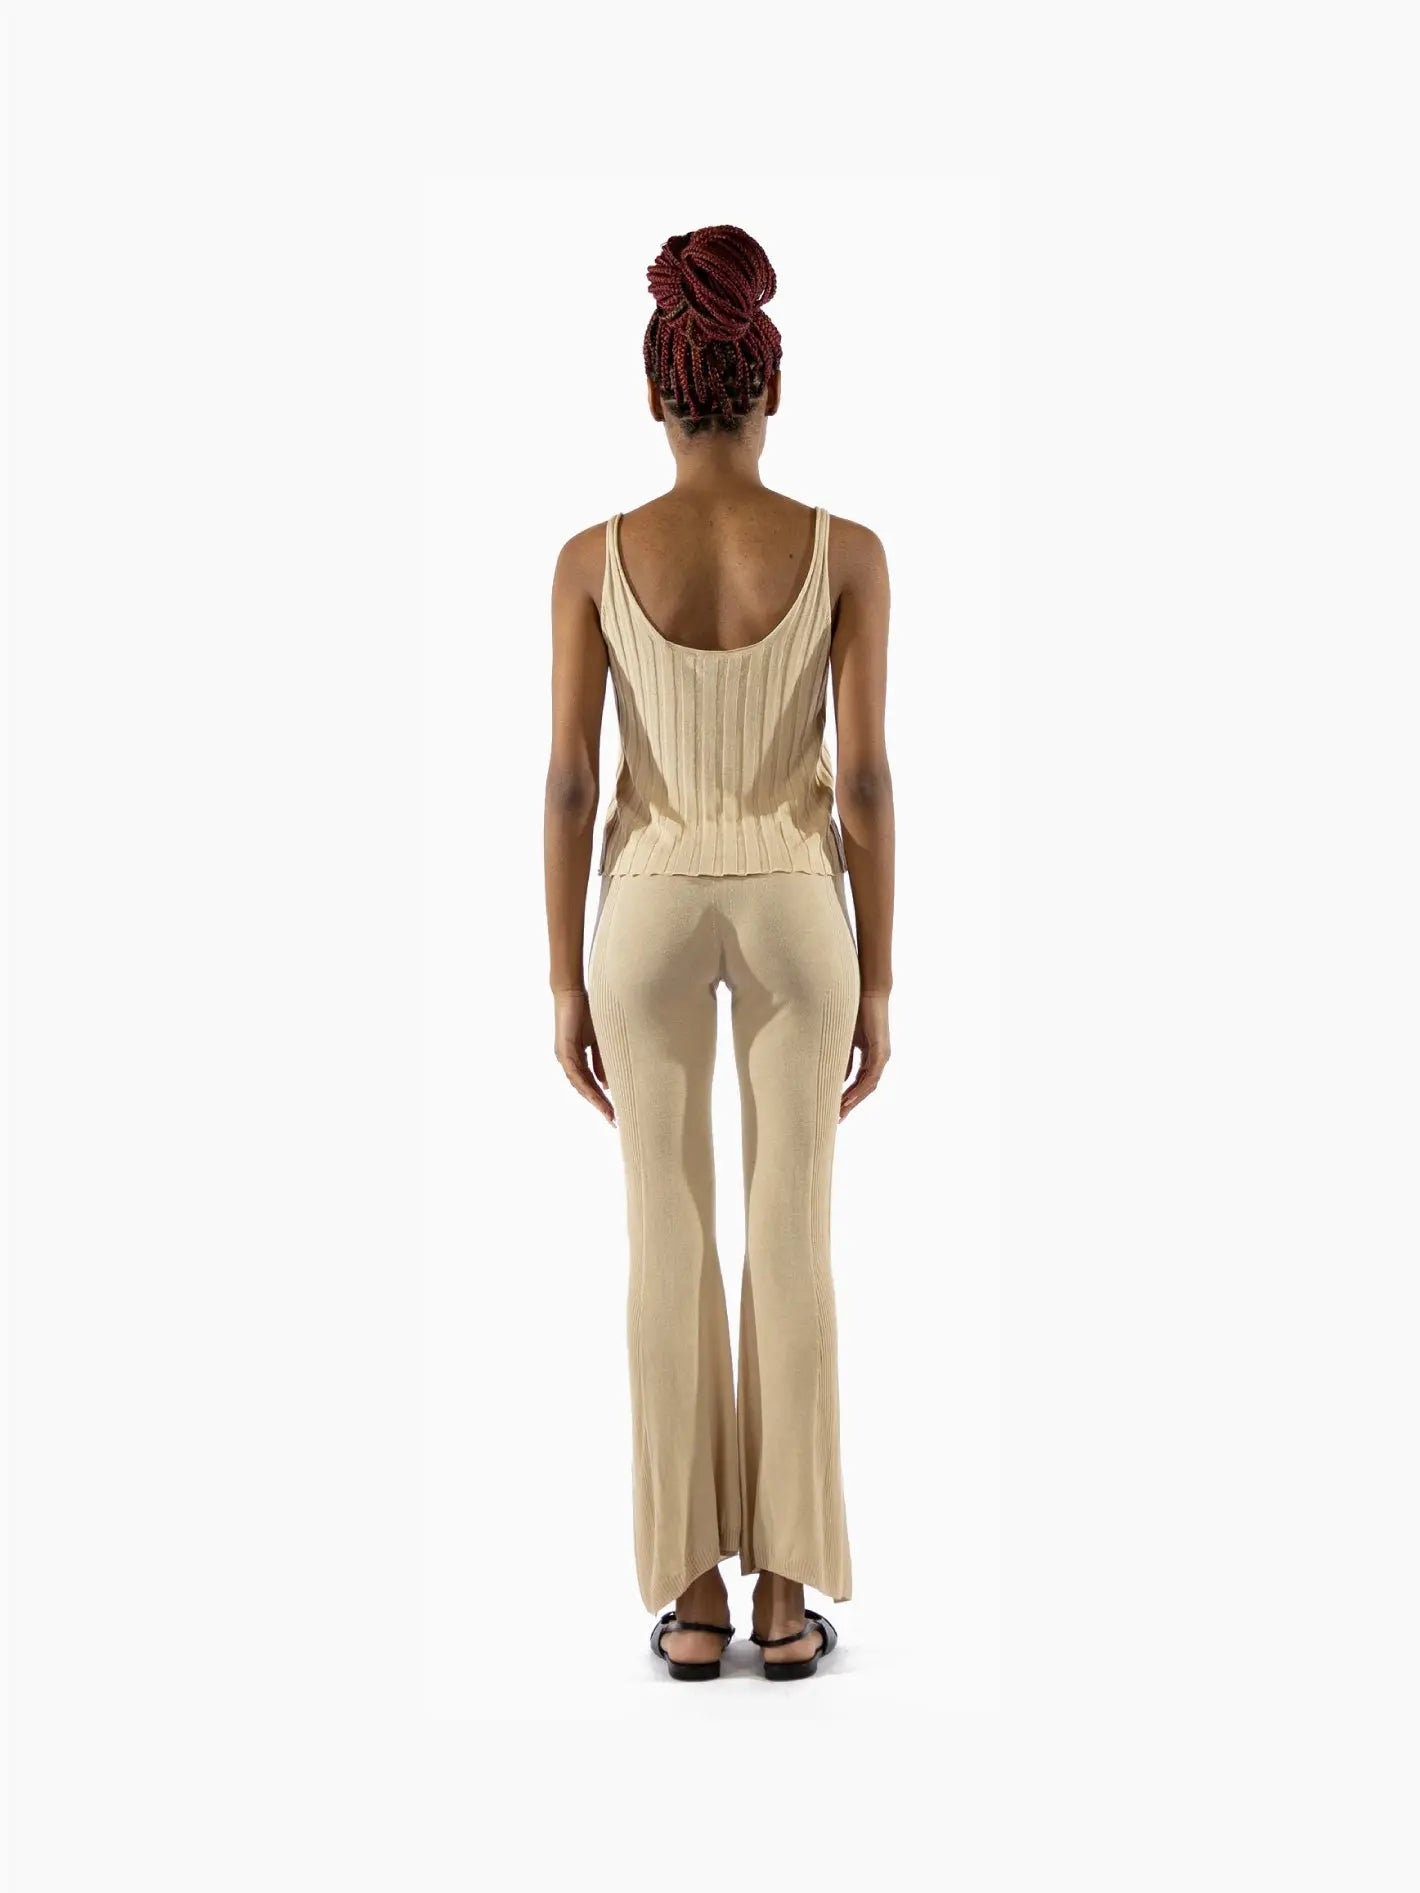 A person with an upright posture is wearing a beige knit tank top and matching wide-leg Lec Pants Latte by Bielo. They have dark hair styled in an updo and are standing against a plain white background, embodying the chic simplicity often seen in Barcelona's fashion. The outfit appears to be simple and comfortable.